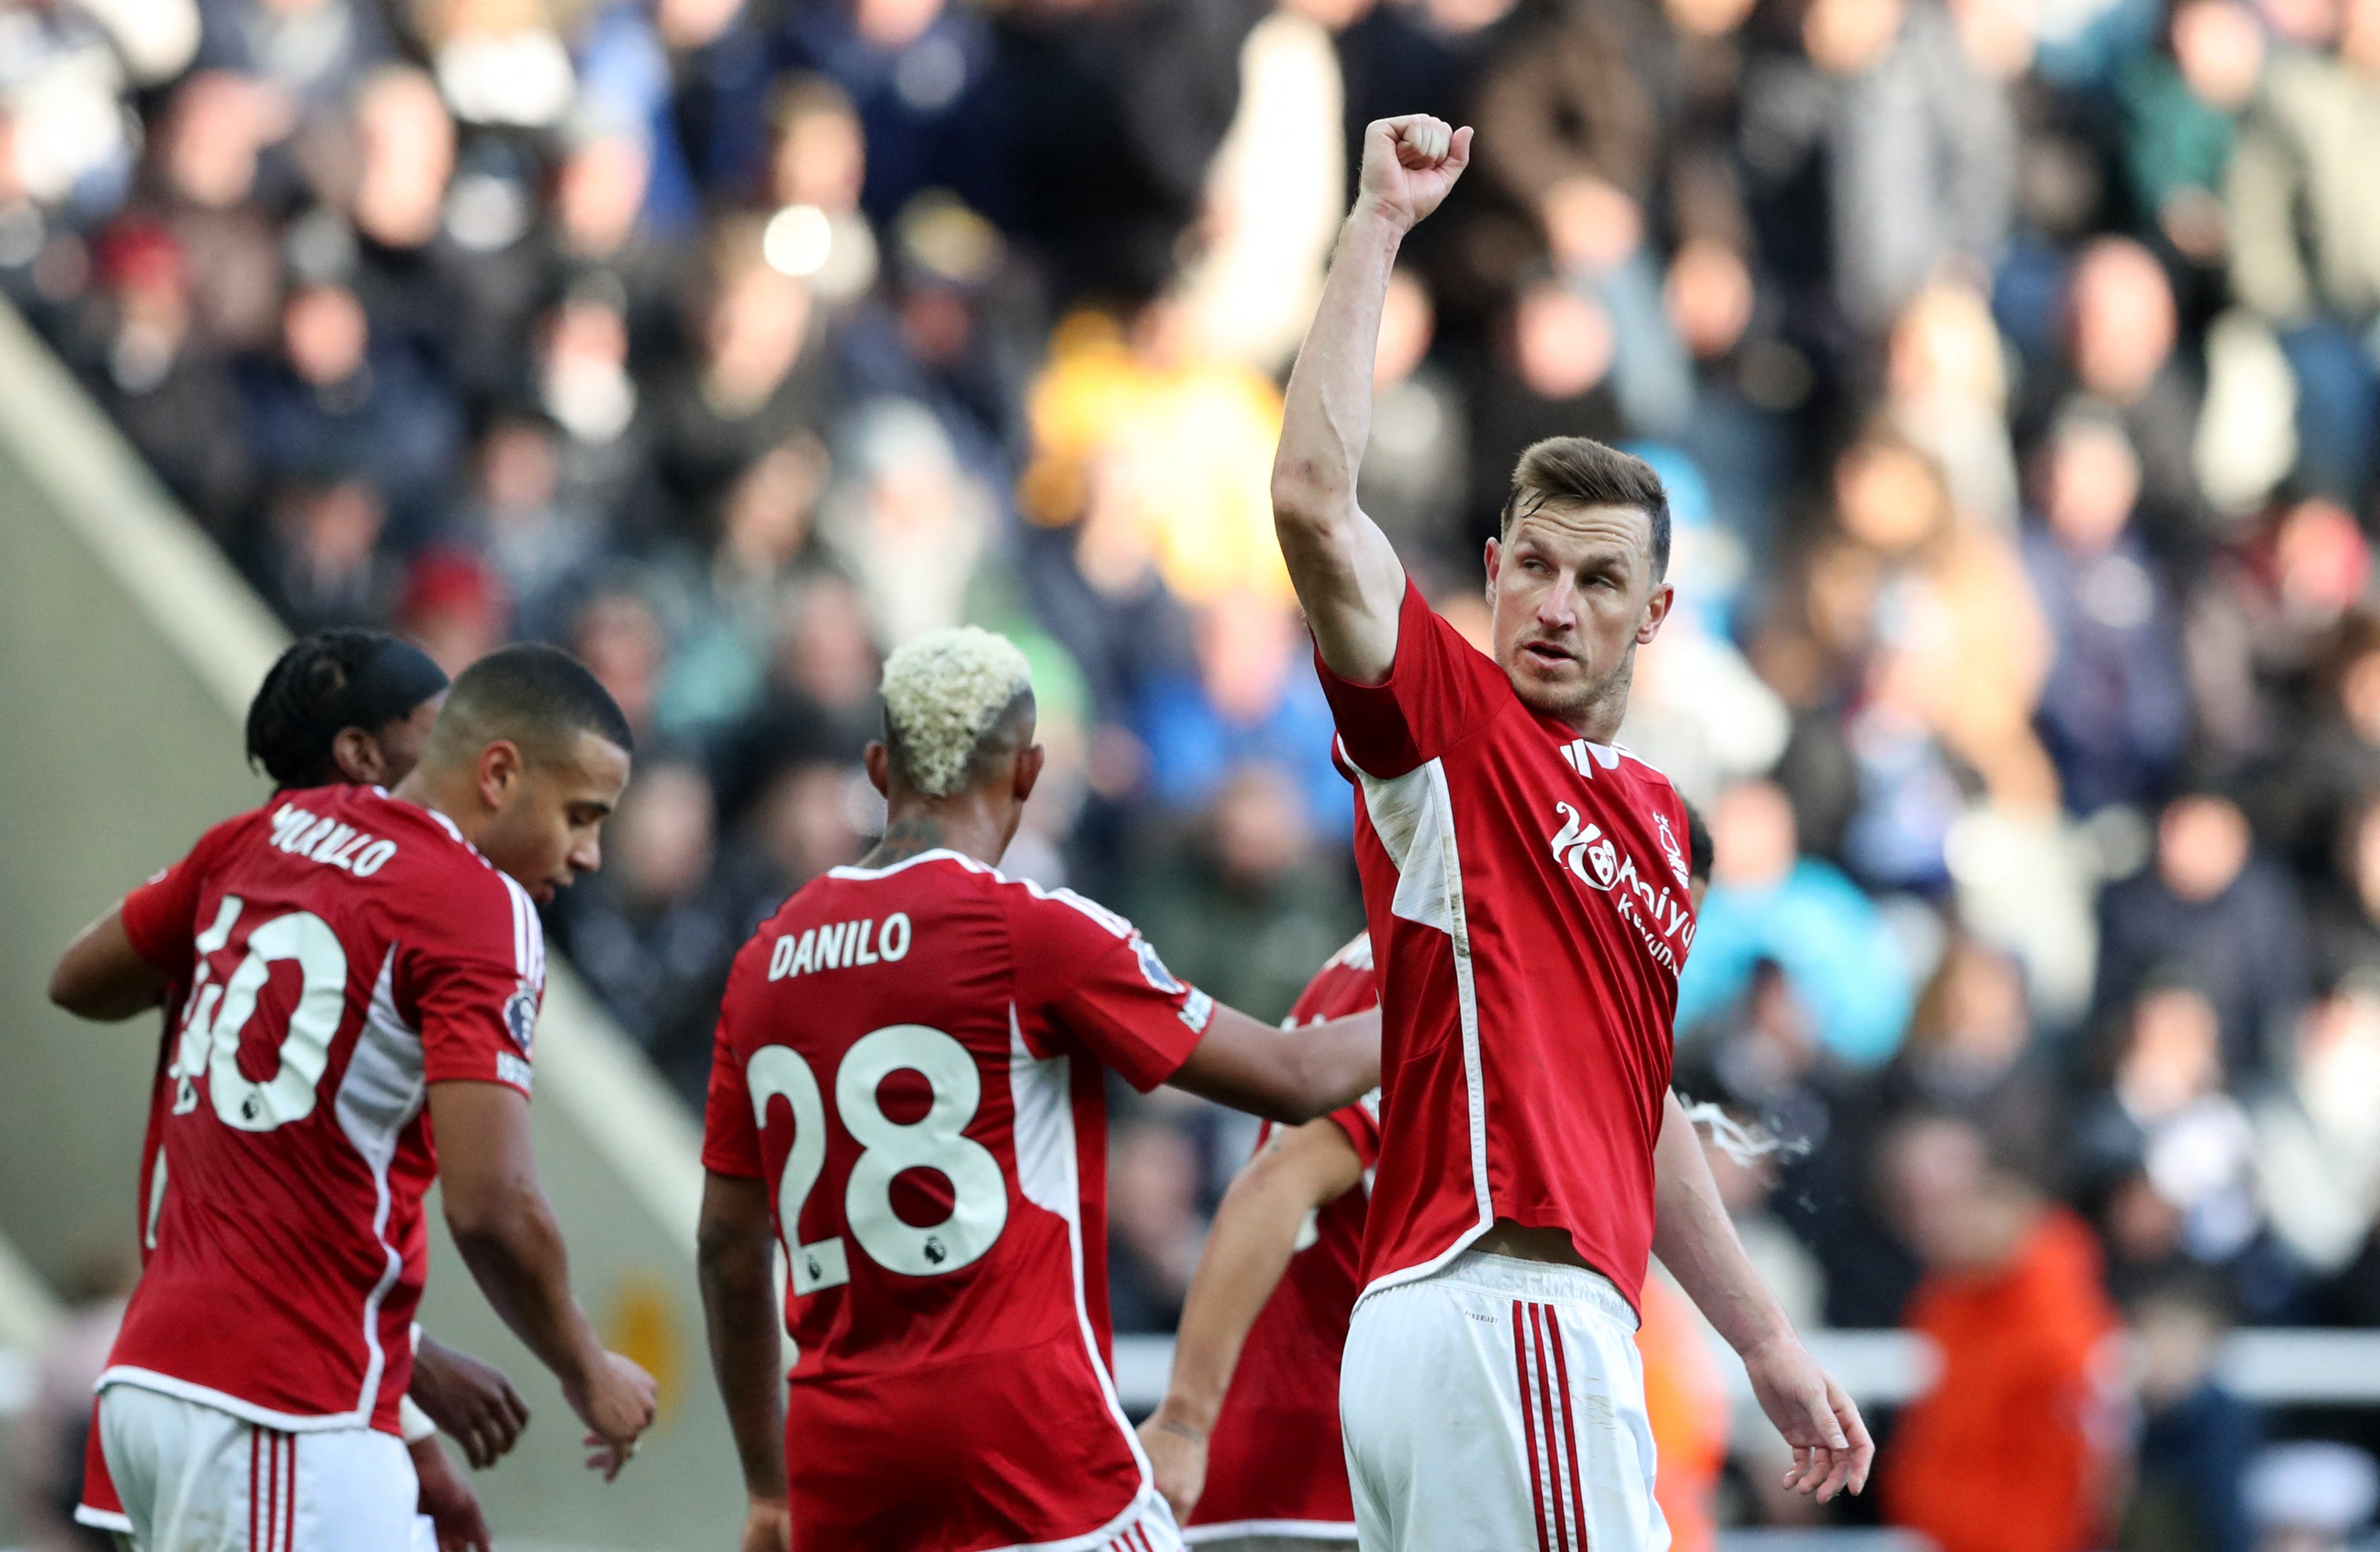 Newcastle vs Nottingham Forest LIVE: Premier League latest score and goal updates after Chris Wood equaliser | The Independent